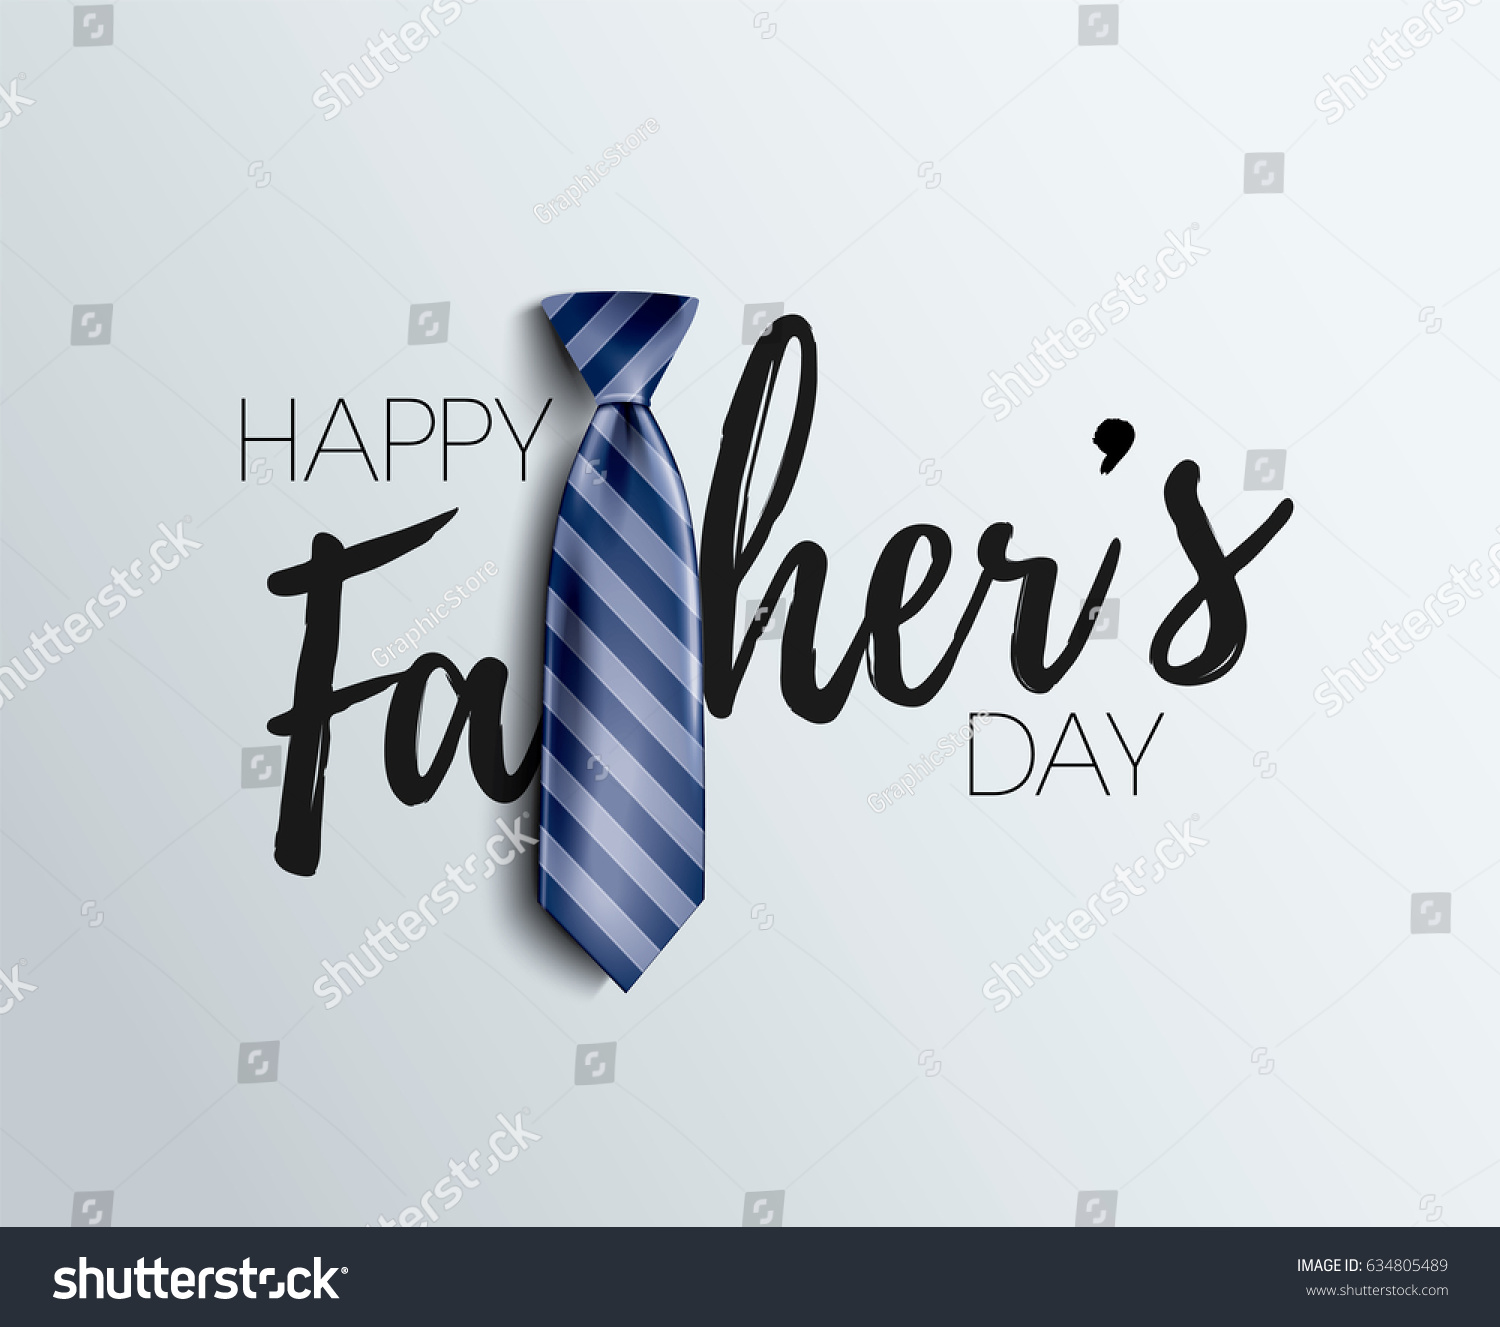 Happy Father’s Day Calligraphy greeting card. Vector illustration. #634805489